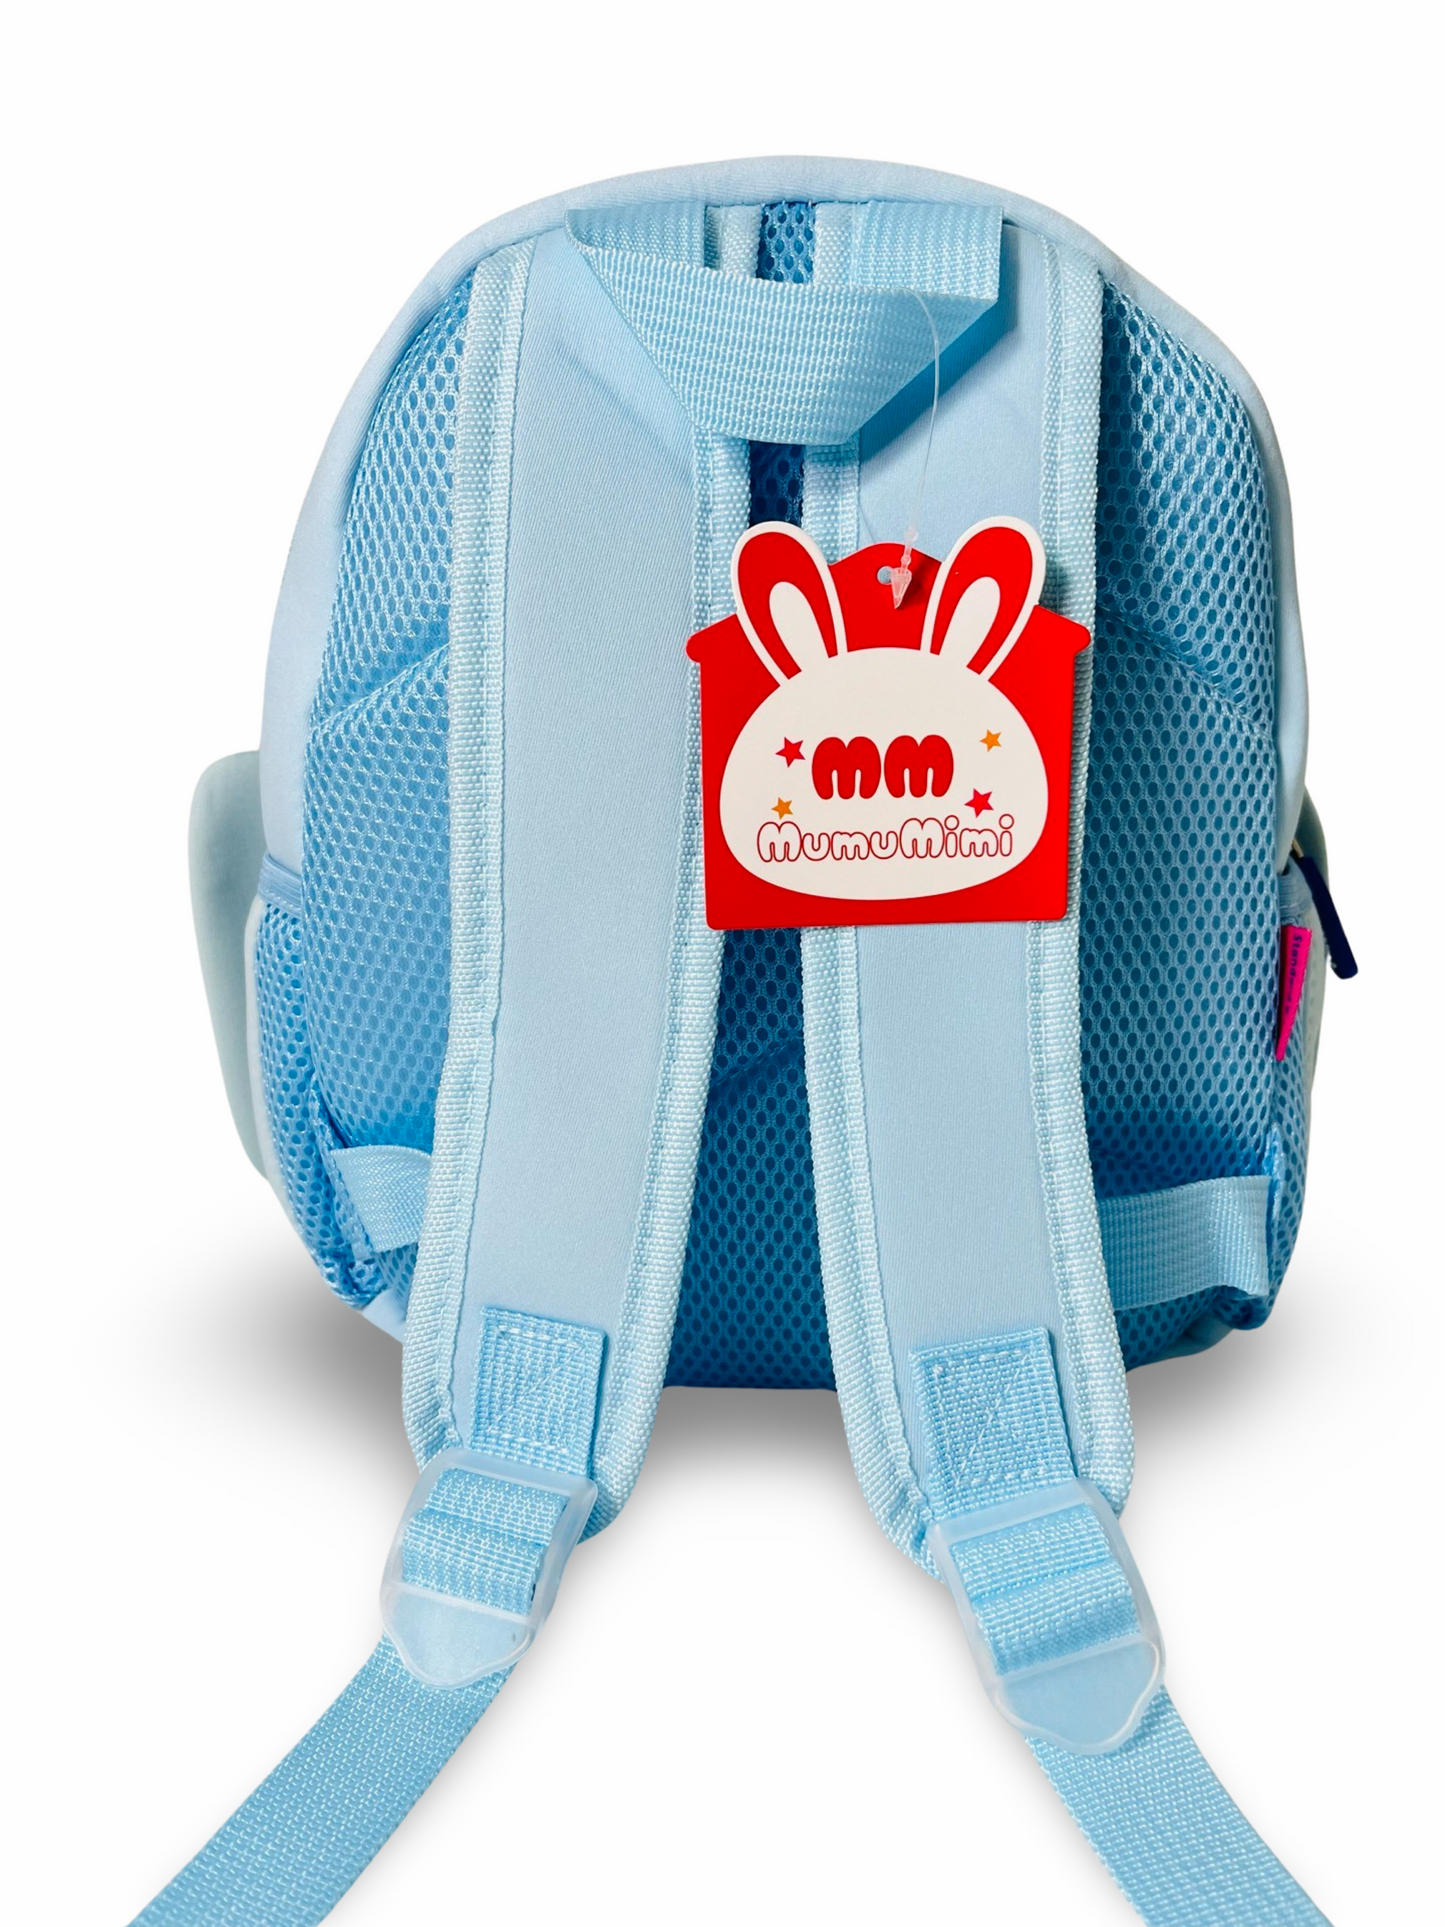 Cute Baby Elephant Soft Plush Backpack with Front Pocket for Kids (Blue)